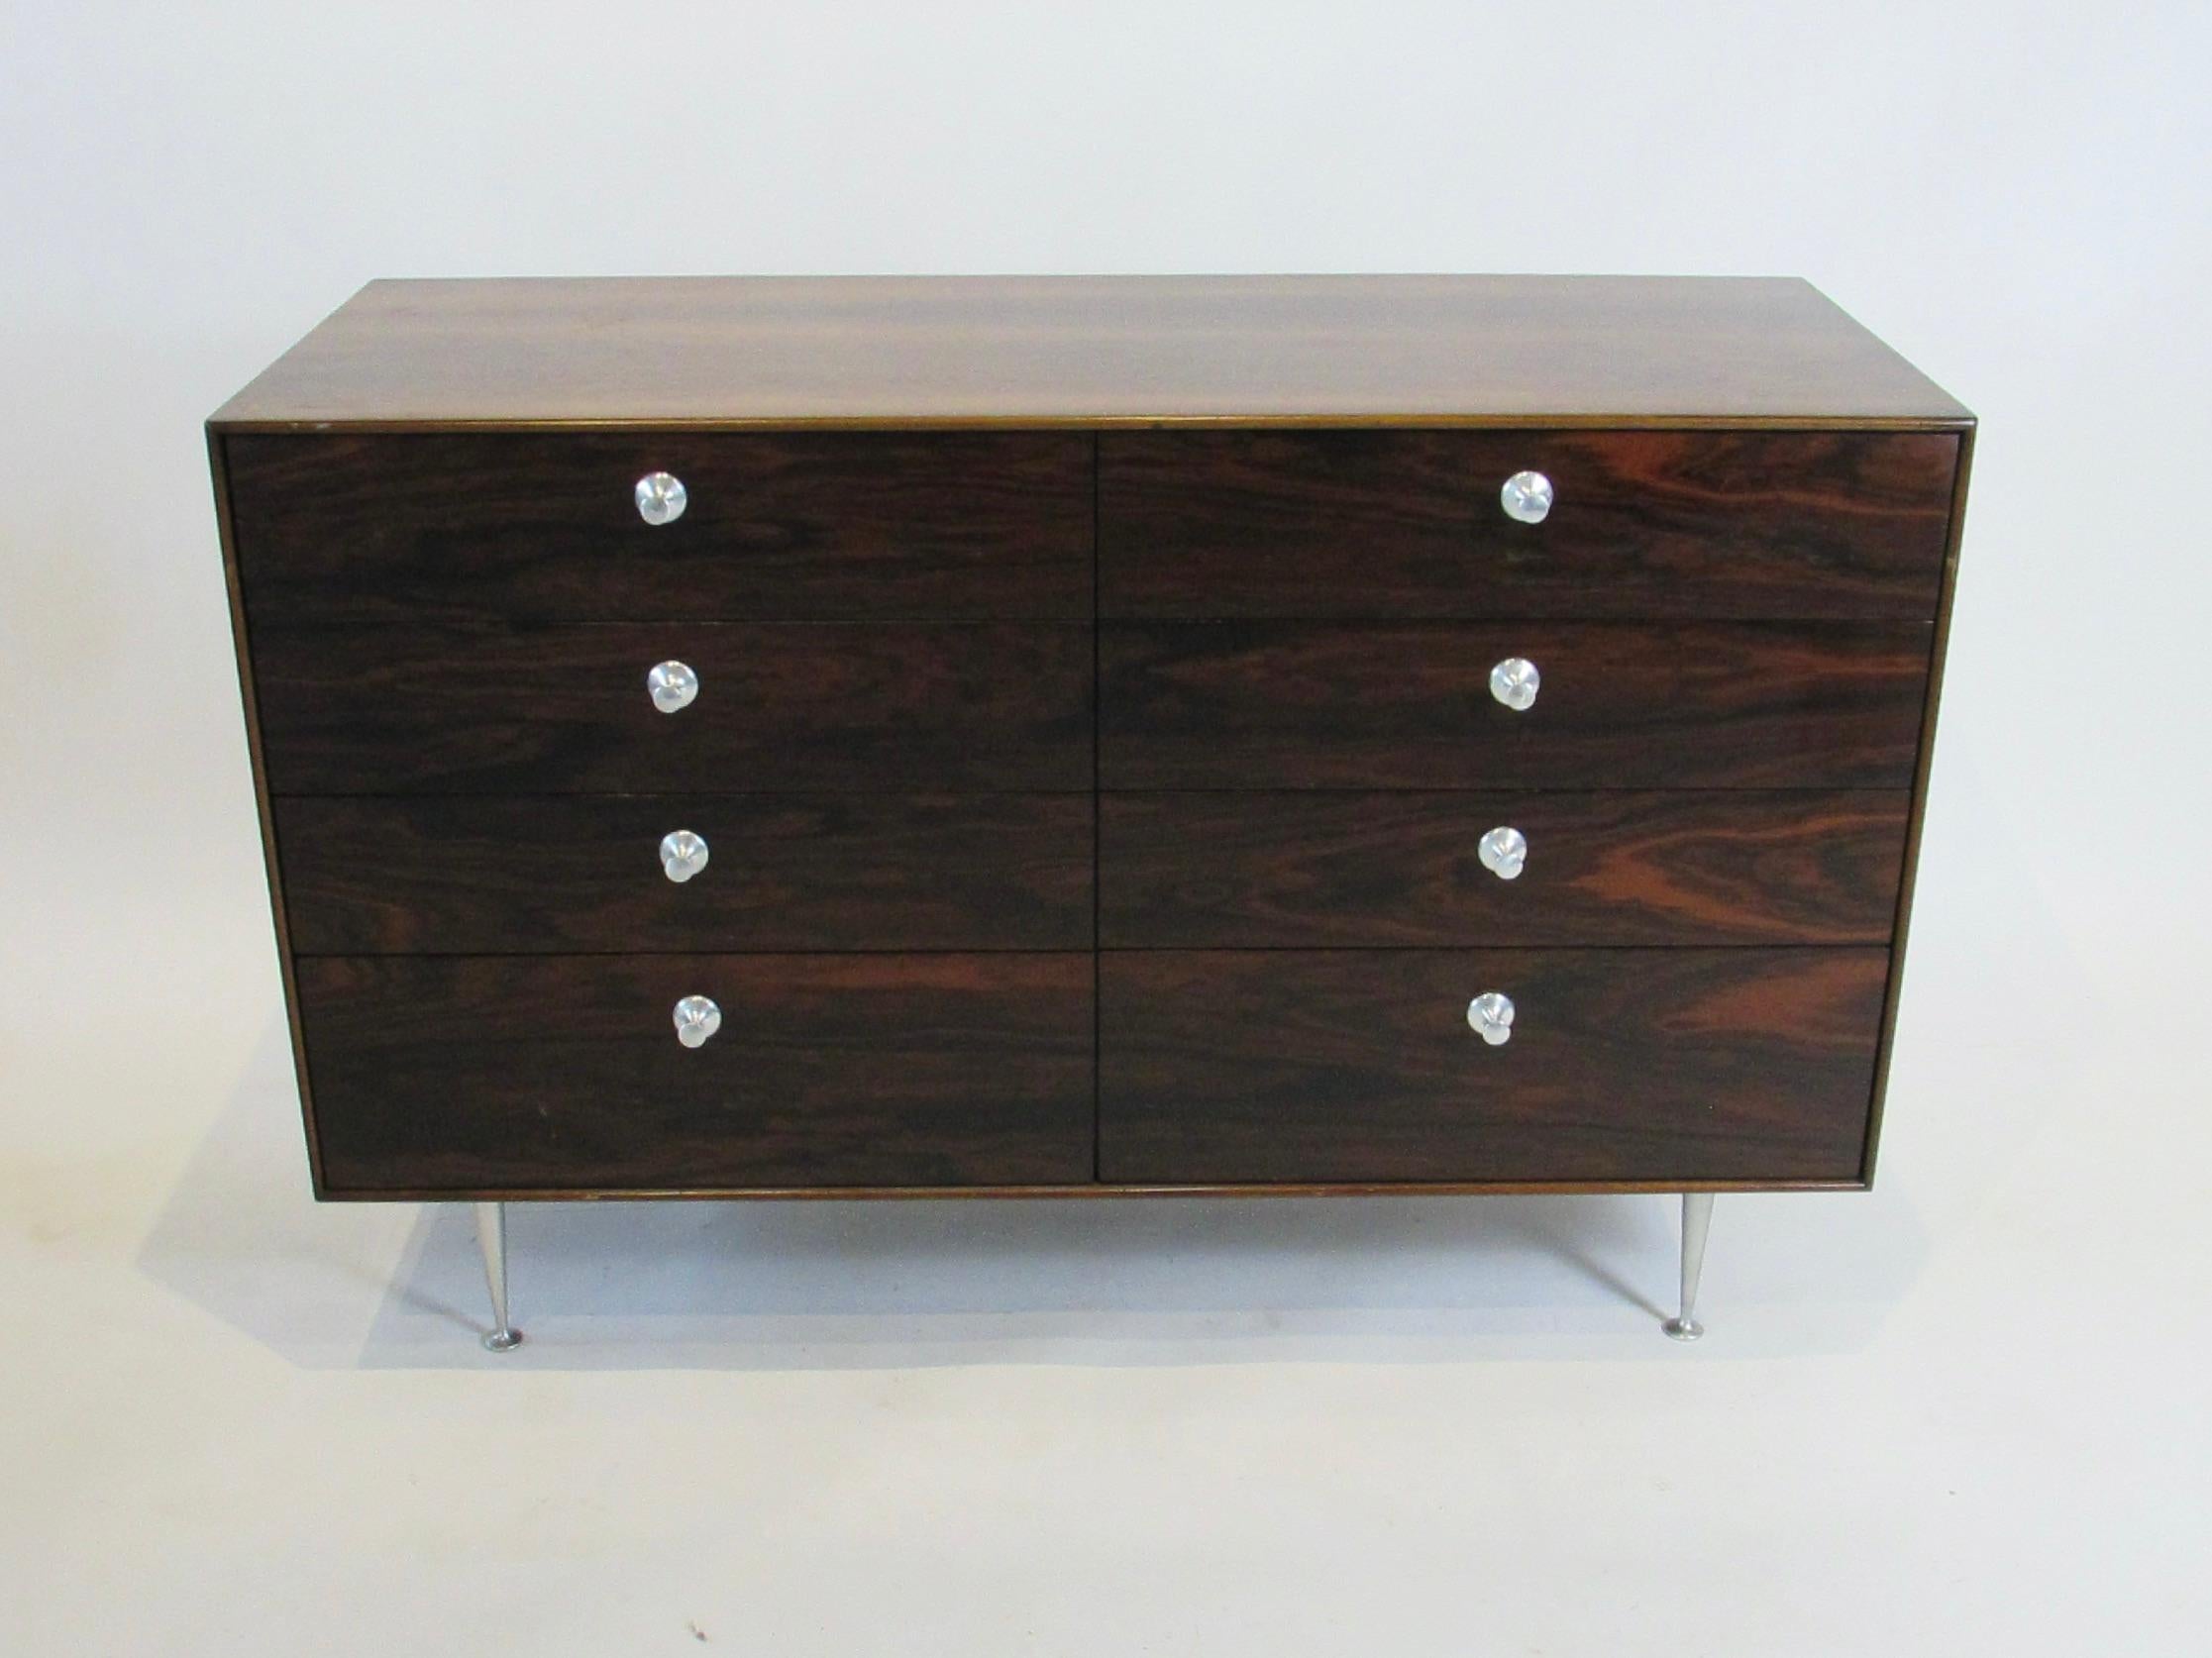 George Nelson Herman Miller Rosewood Thin Edge Eight Drawer Dresser In Good Condition For Sale In Ferndale, MI